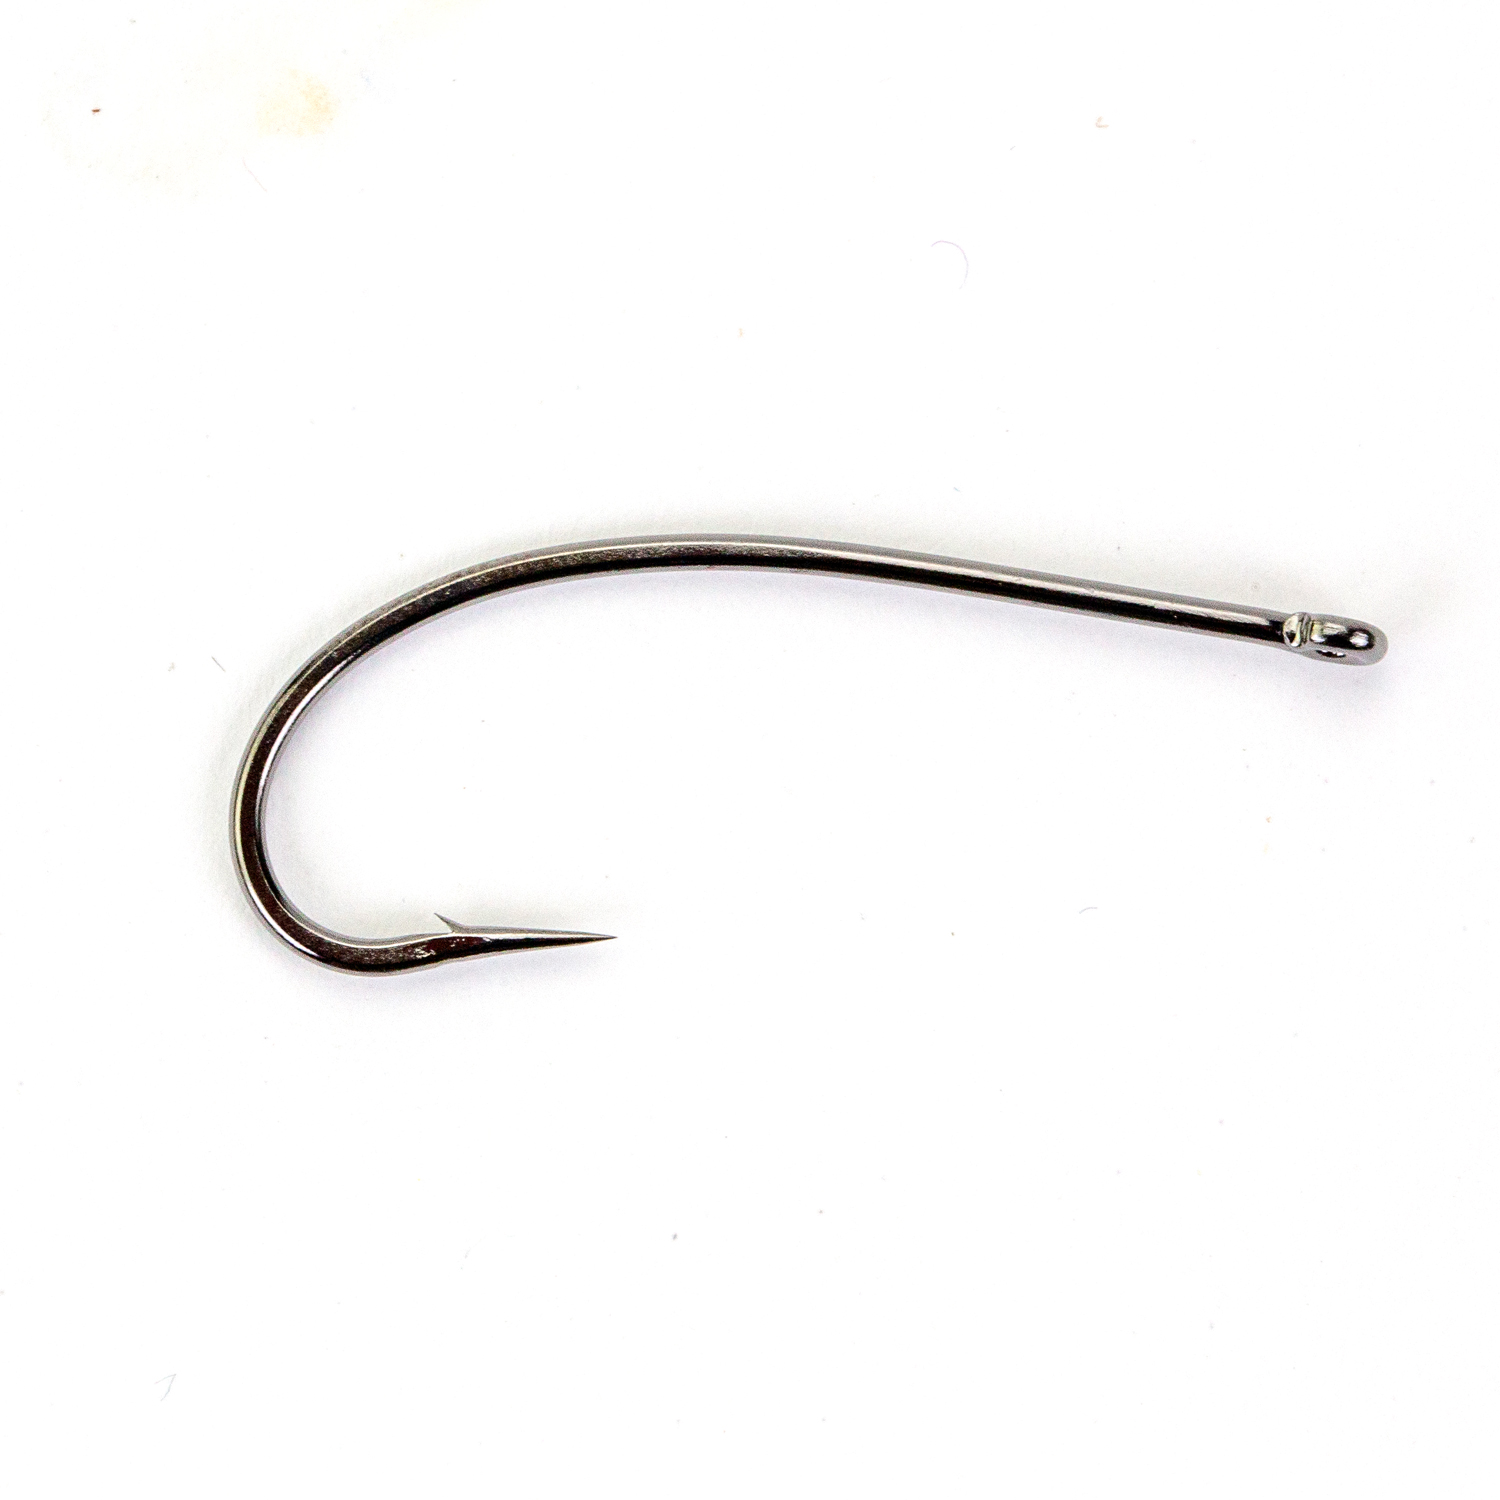 Hook More Fish - Shop Our High-Quality Fly Hooks